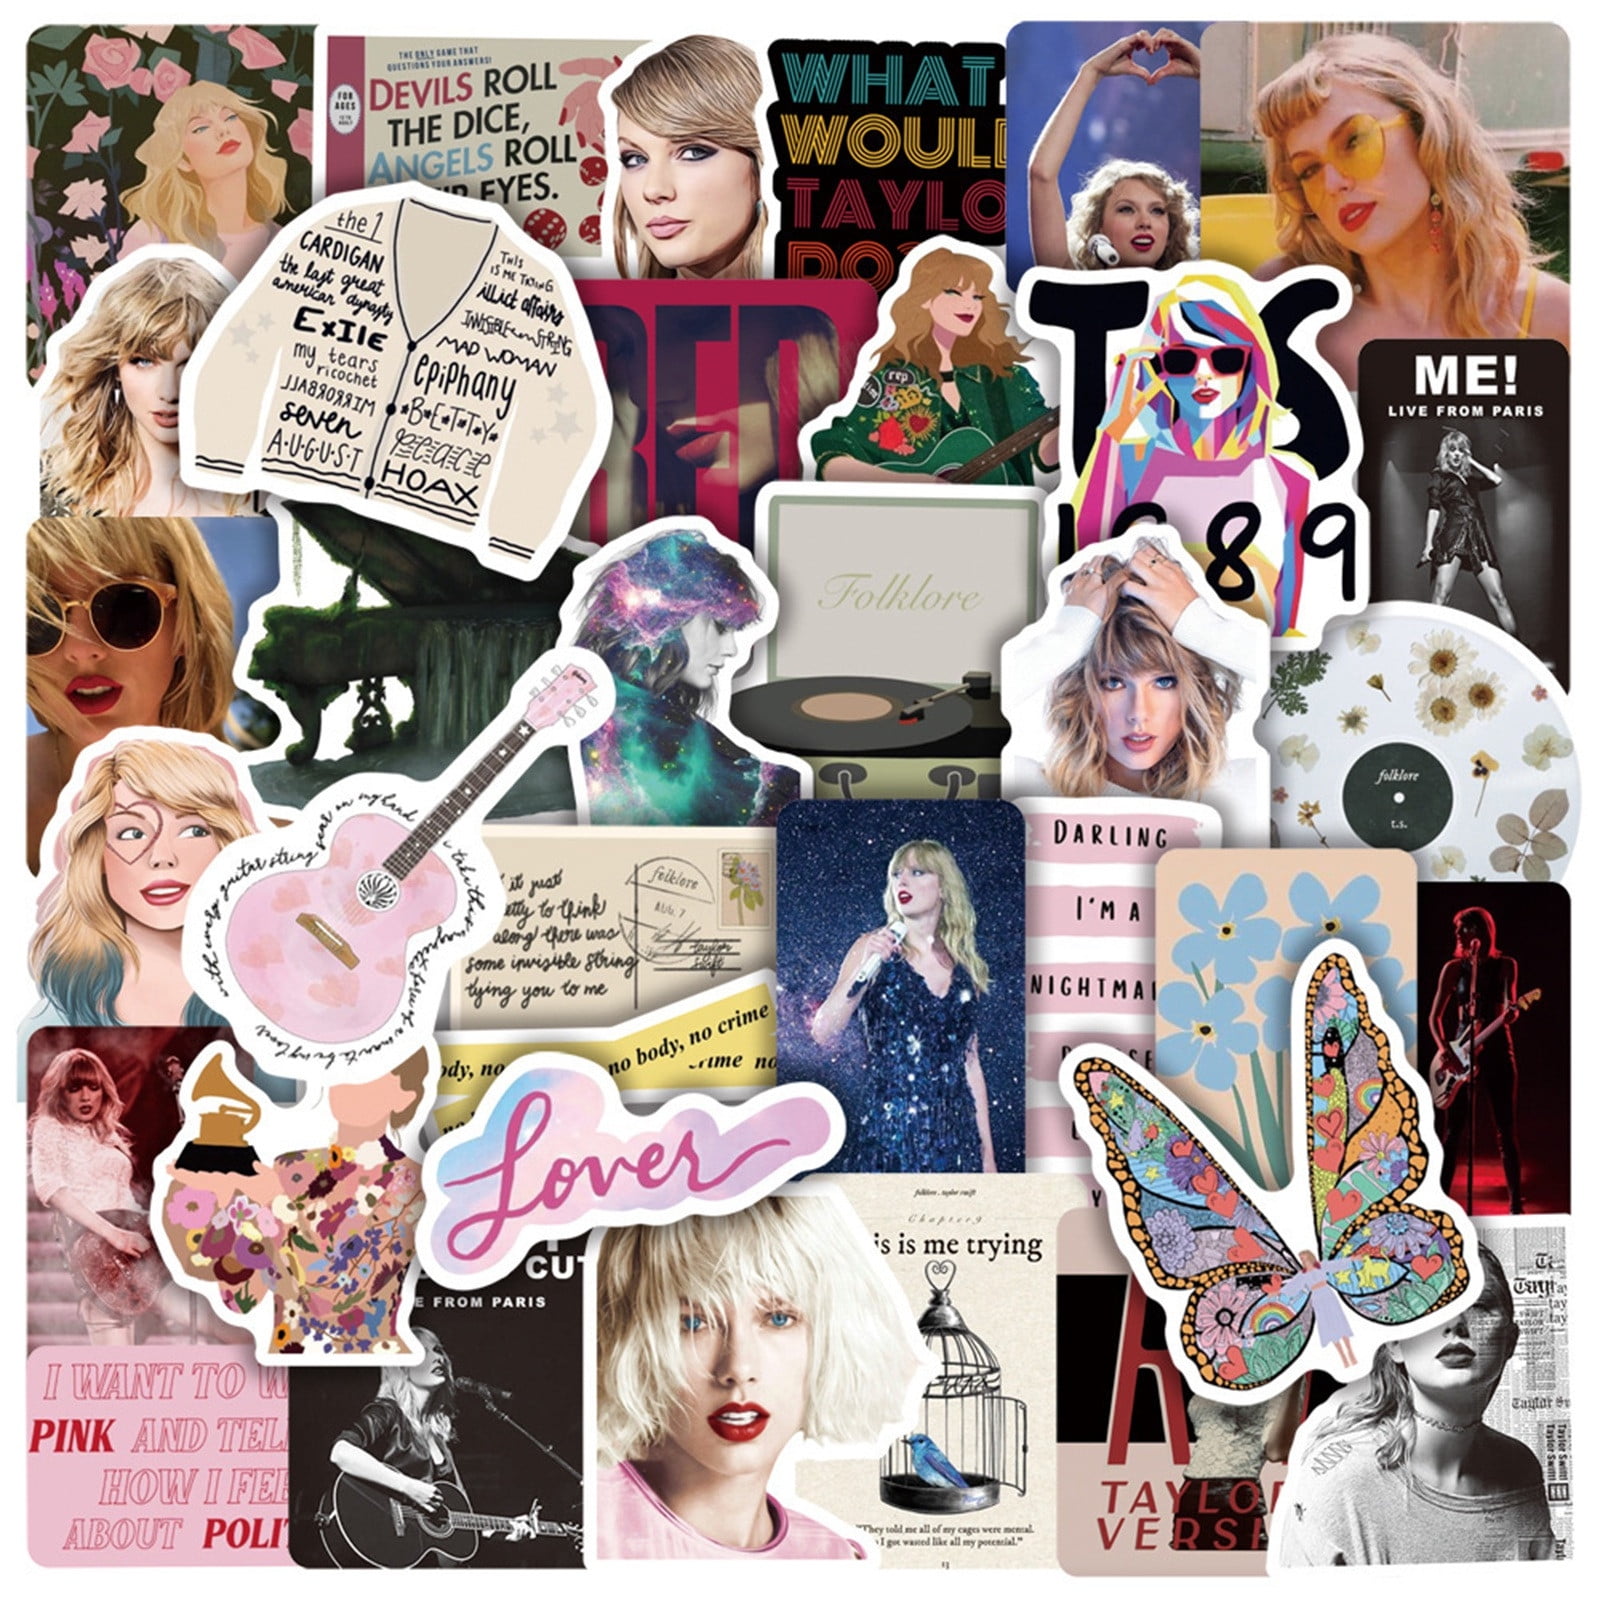 50pcs Swift Ablum Stickers for Adult, Taylor Singer Albums Stickers,  Waterproof Vinyl Sticker for Water Bottles, Laptops,Music Fans,Party Favors  Party Decorations Supplies Boys Girls Teens Gifts 